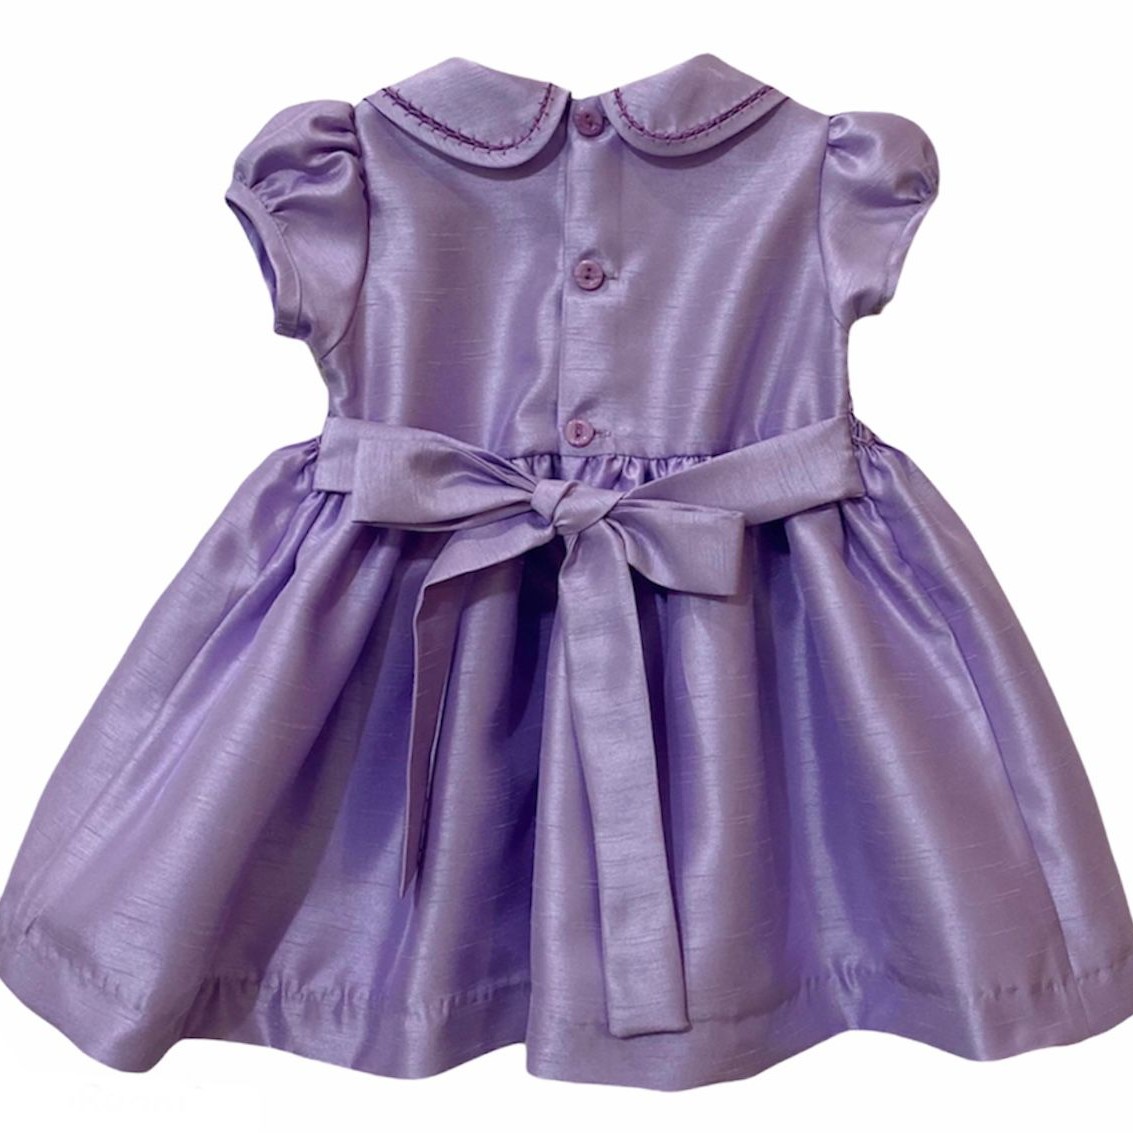 Girl's Dress with Hand Embroidery - Lilac Buttons and Bow at the Waist